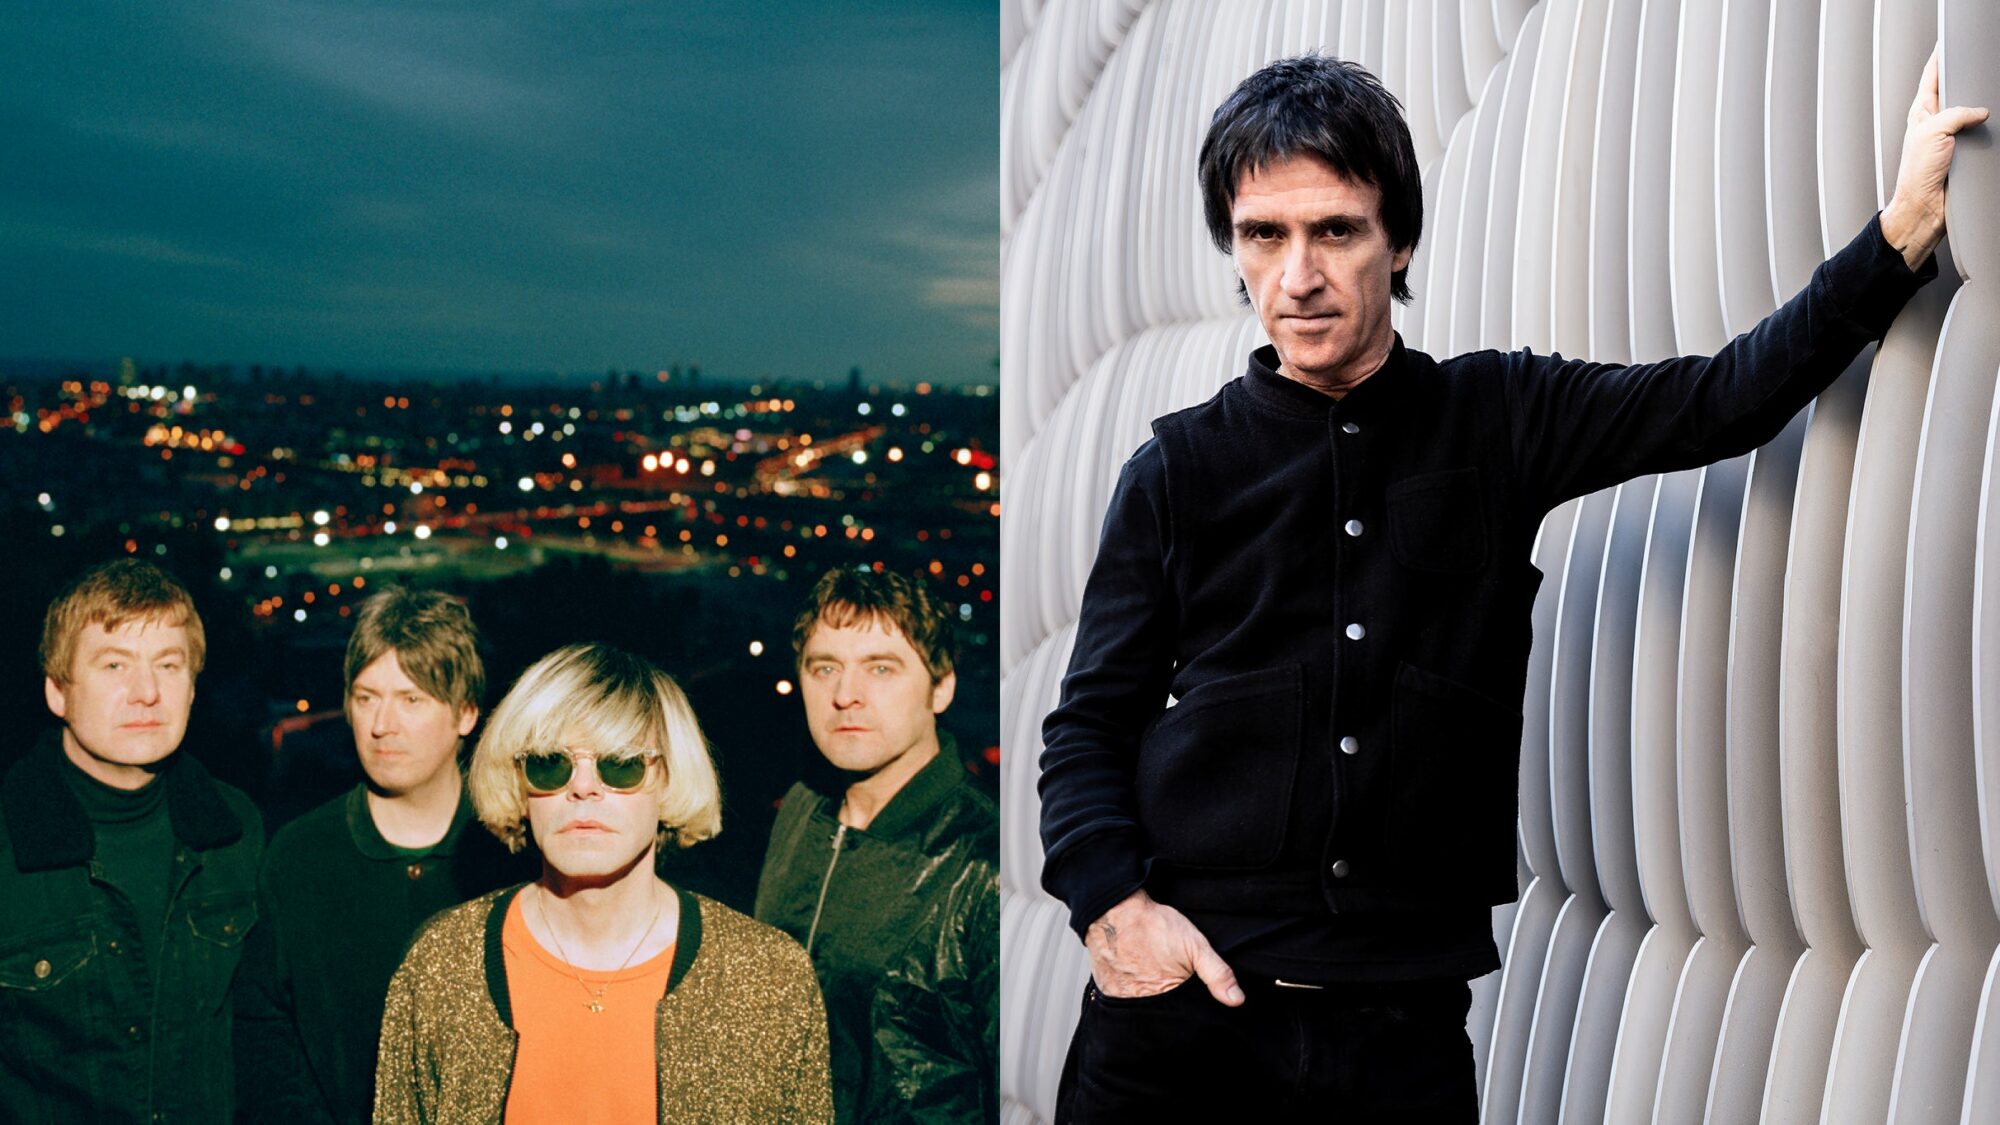 Johnny Marr + The Charlatans at Scarborough Open Air Theatre, Scarborough